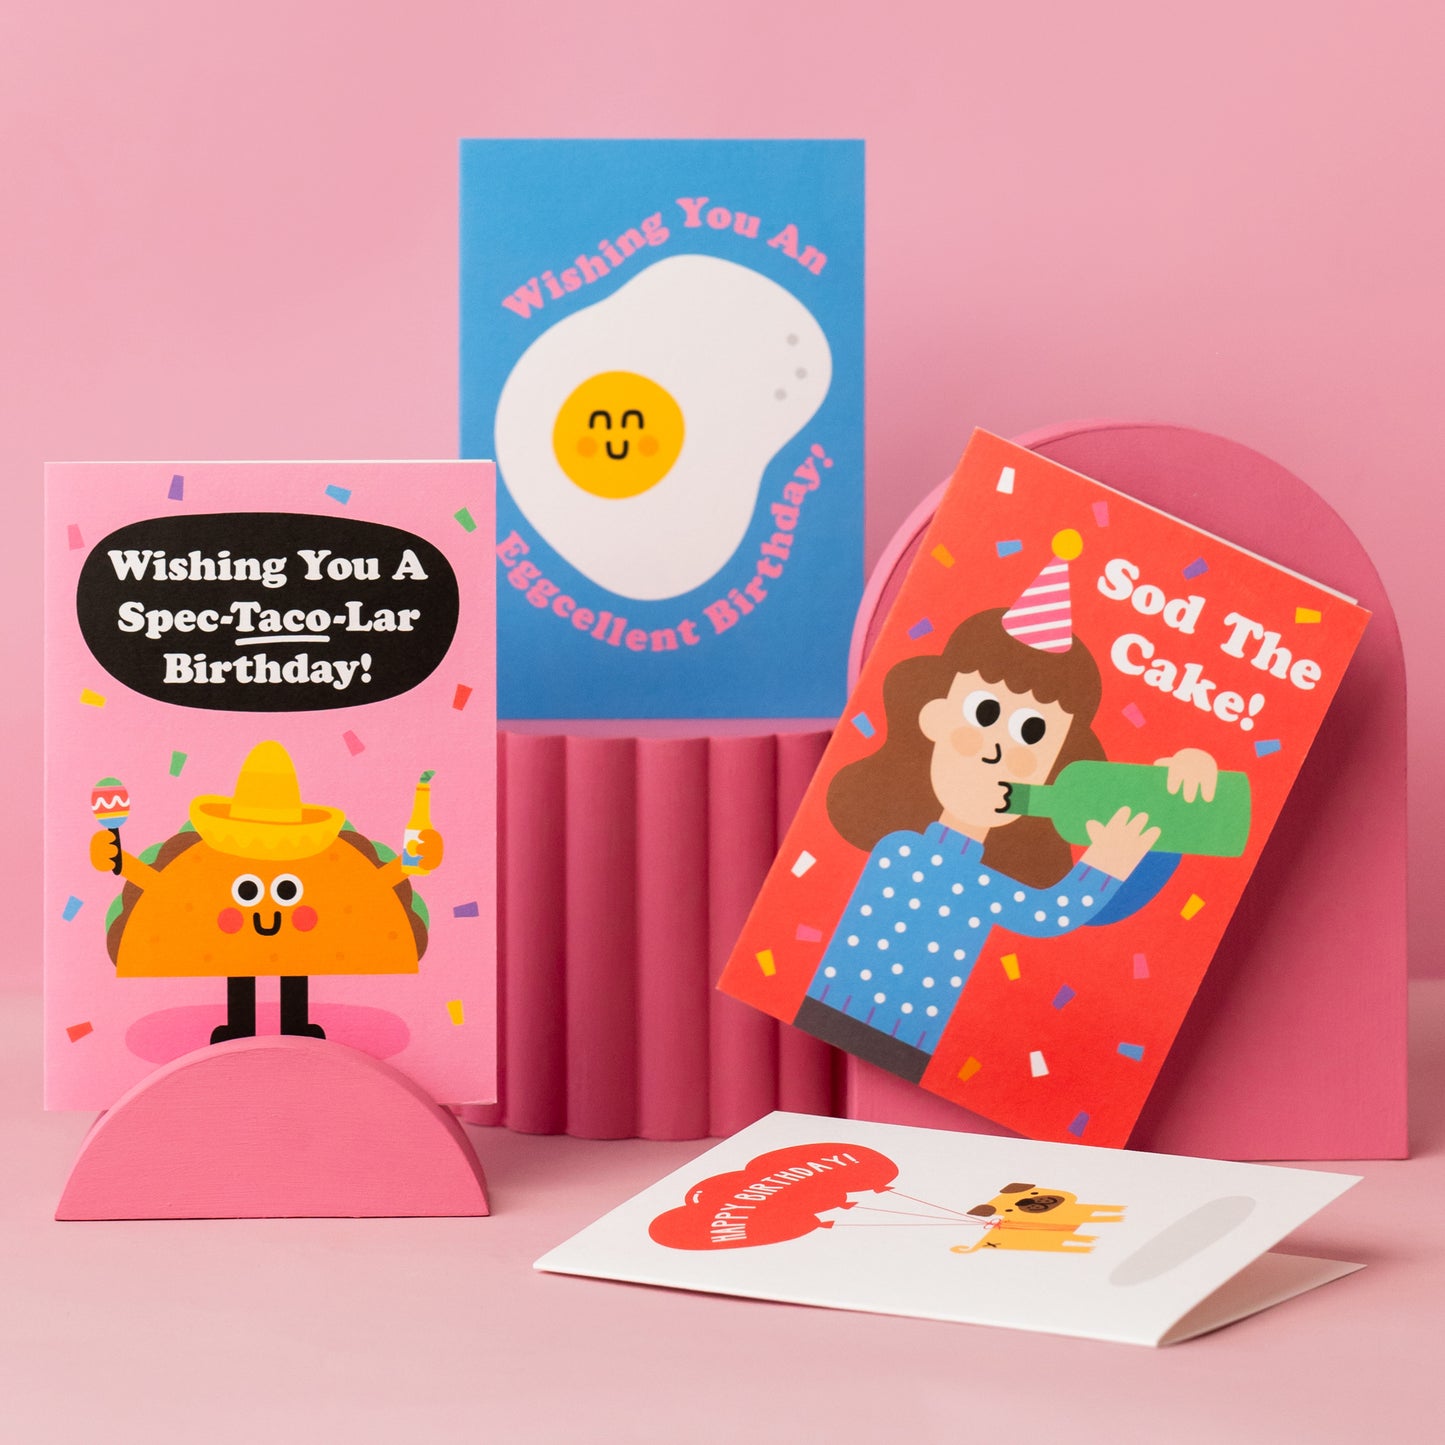 ch-ch-changes Valentines Card